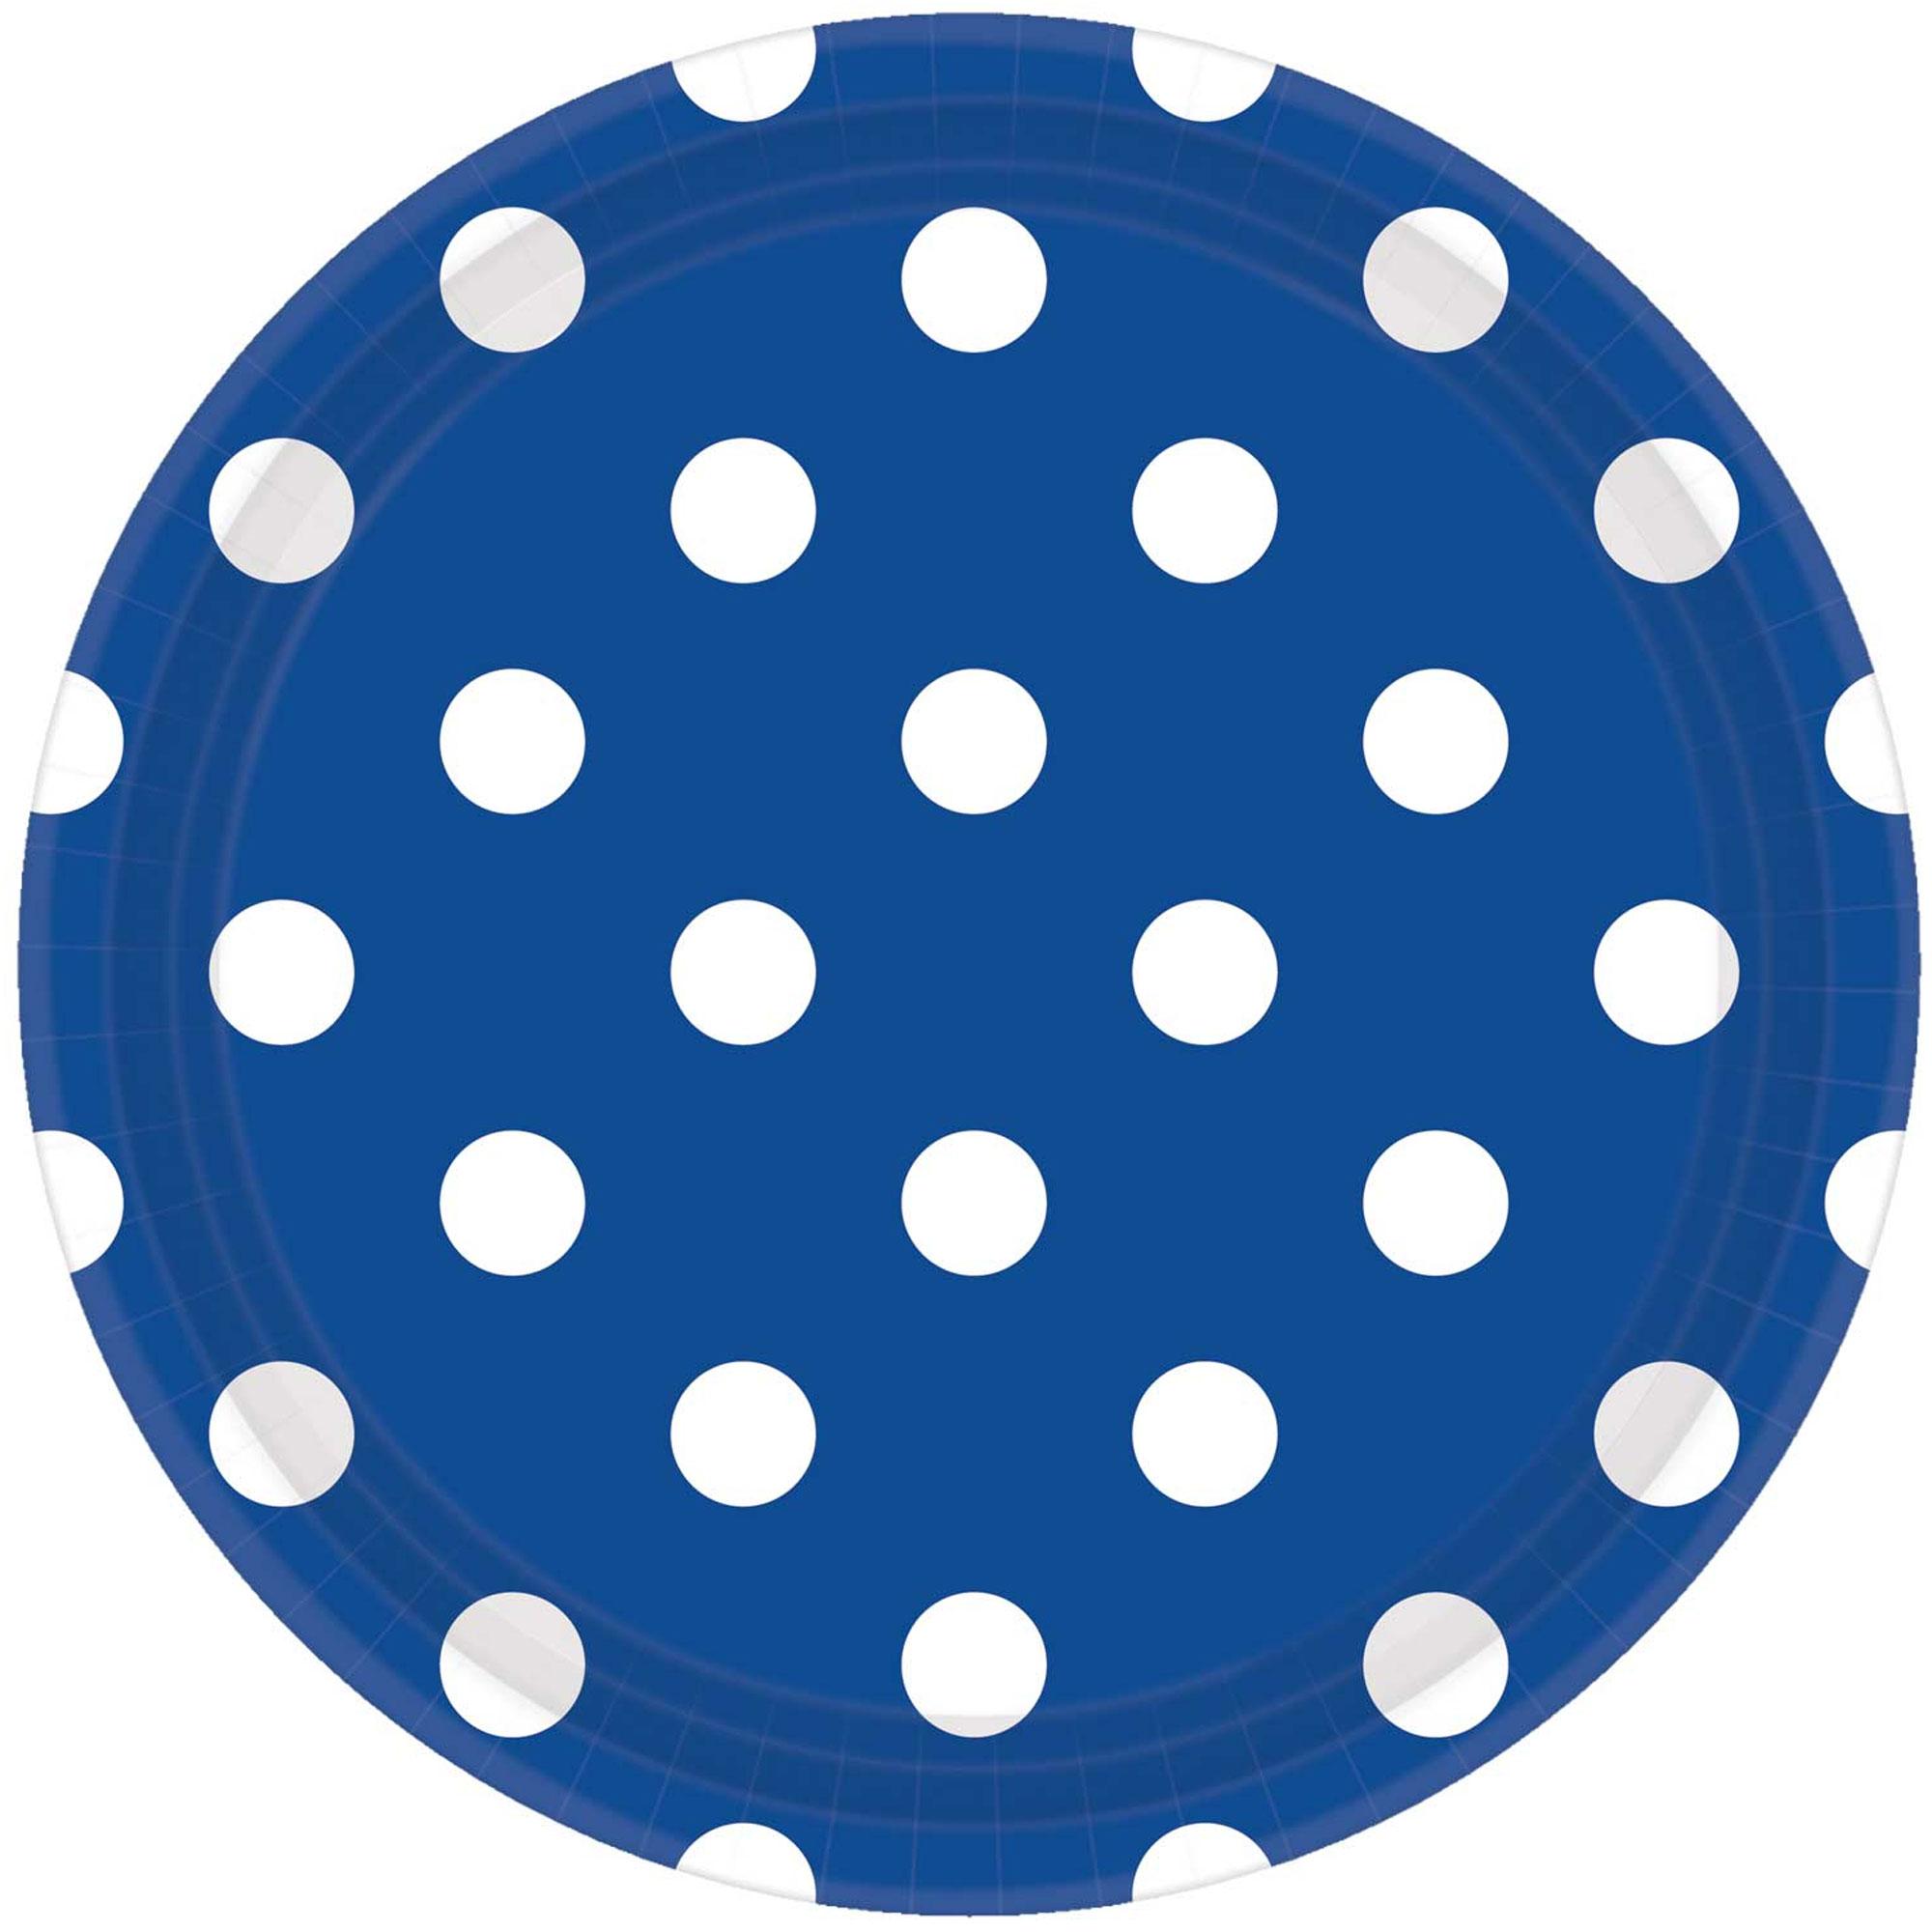 Bright Royal Blue Dots Round Party Paper Plates 9in 8pcs Printed Tableware - Party Centre - Party Centre